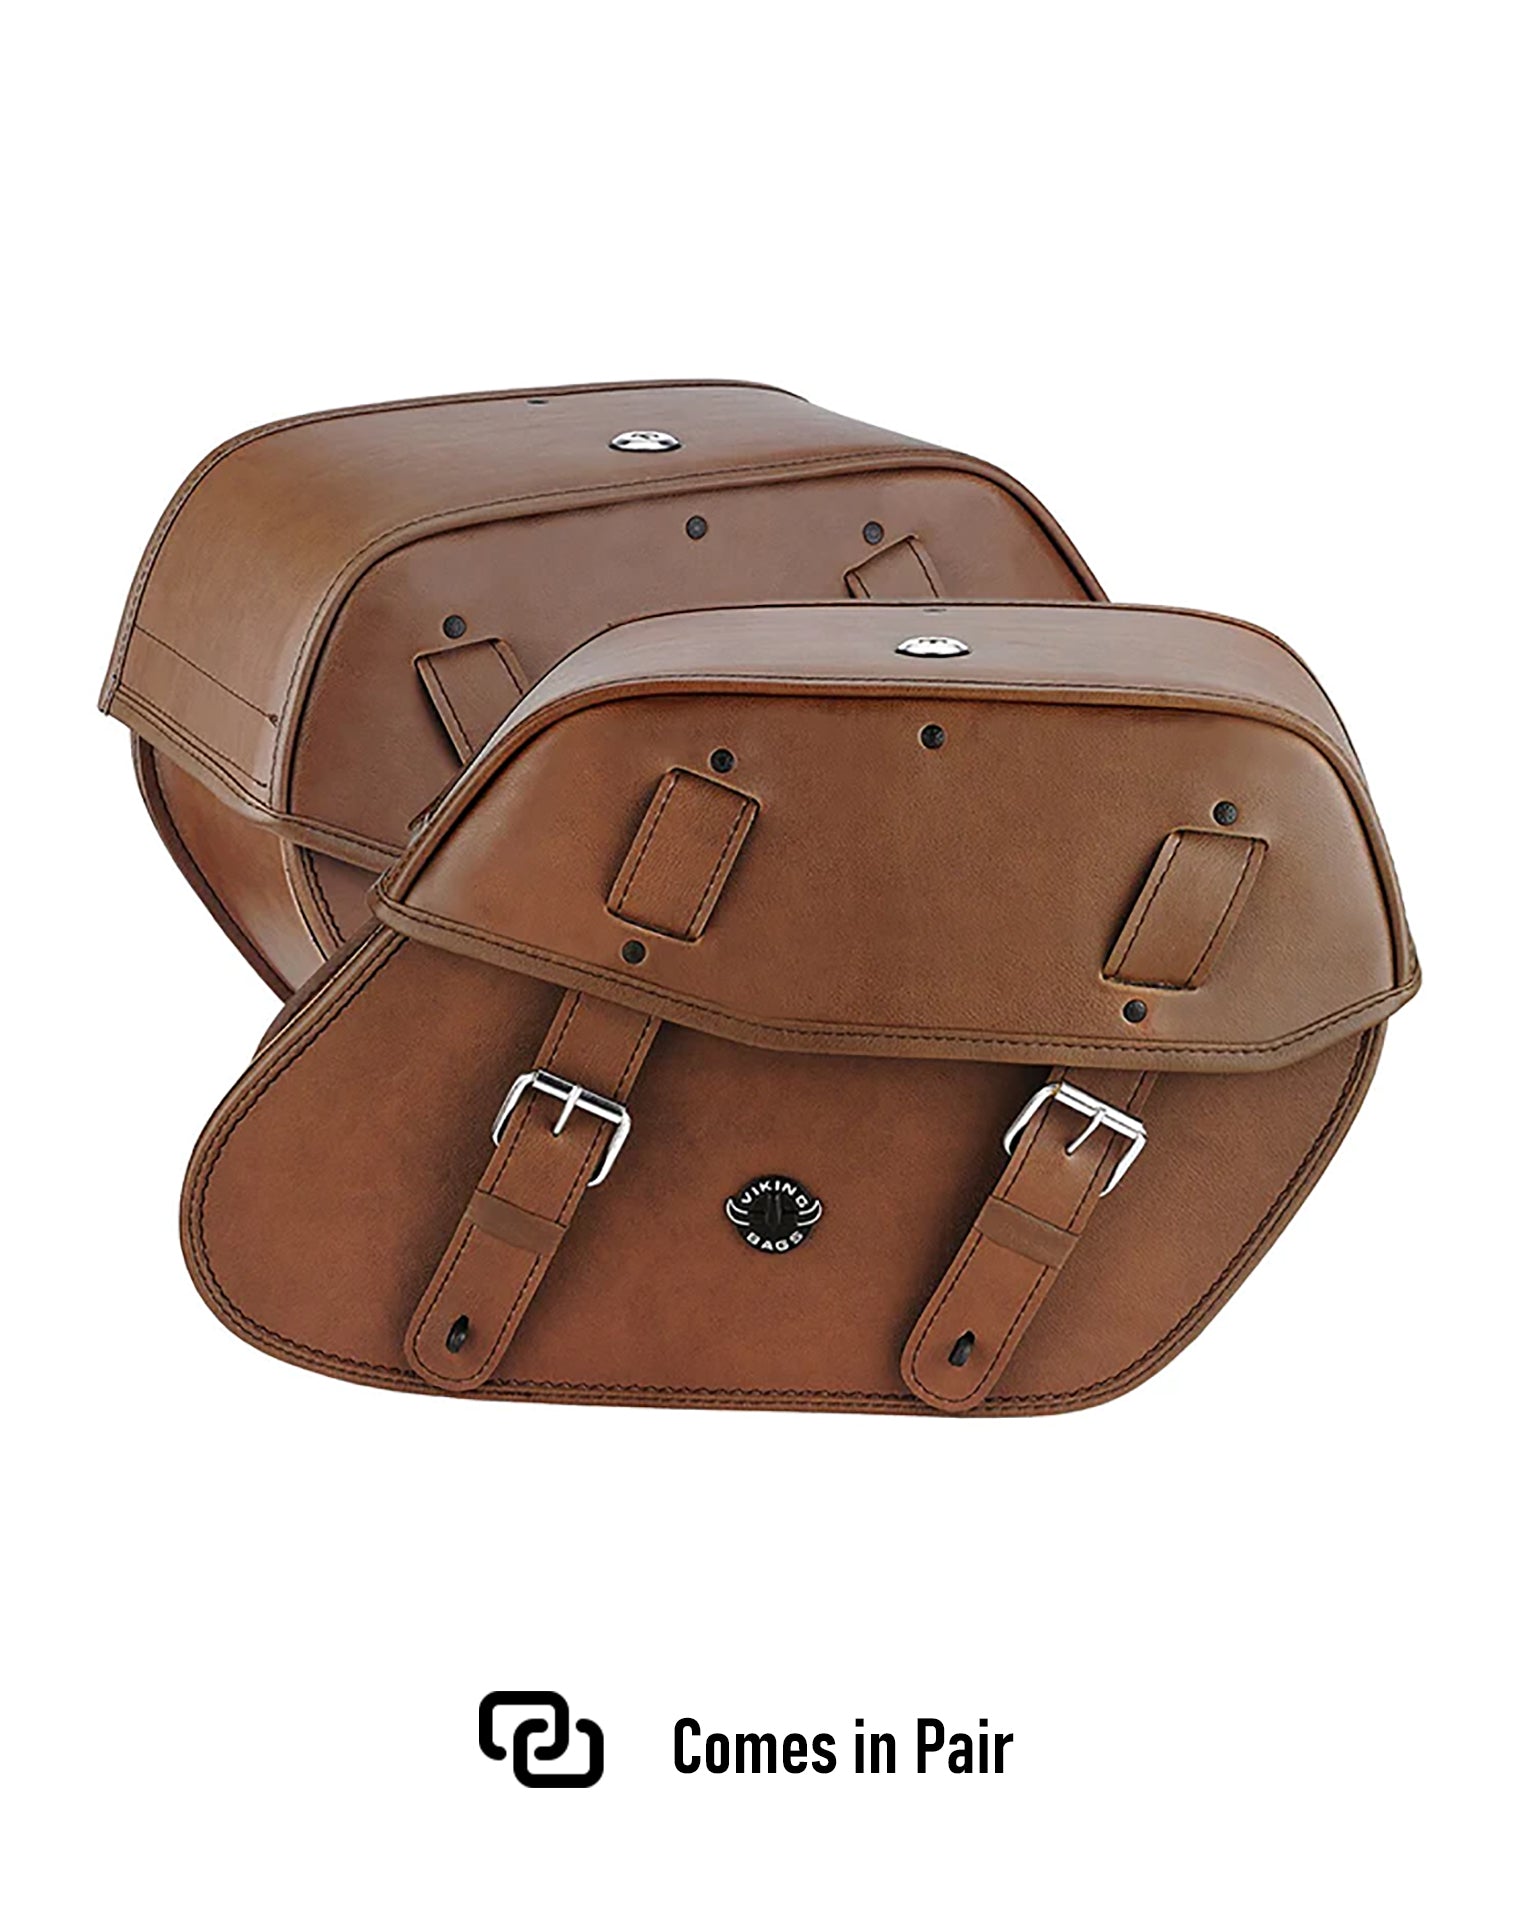 Viking Odin Brown Large Leather Motorcycle Saddlebags For Harley Softail Standard Fxst I Weather Resistant Bags Comes in Pair